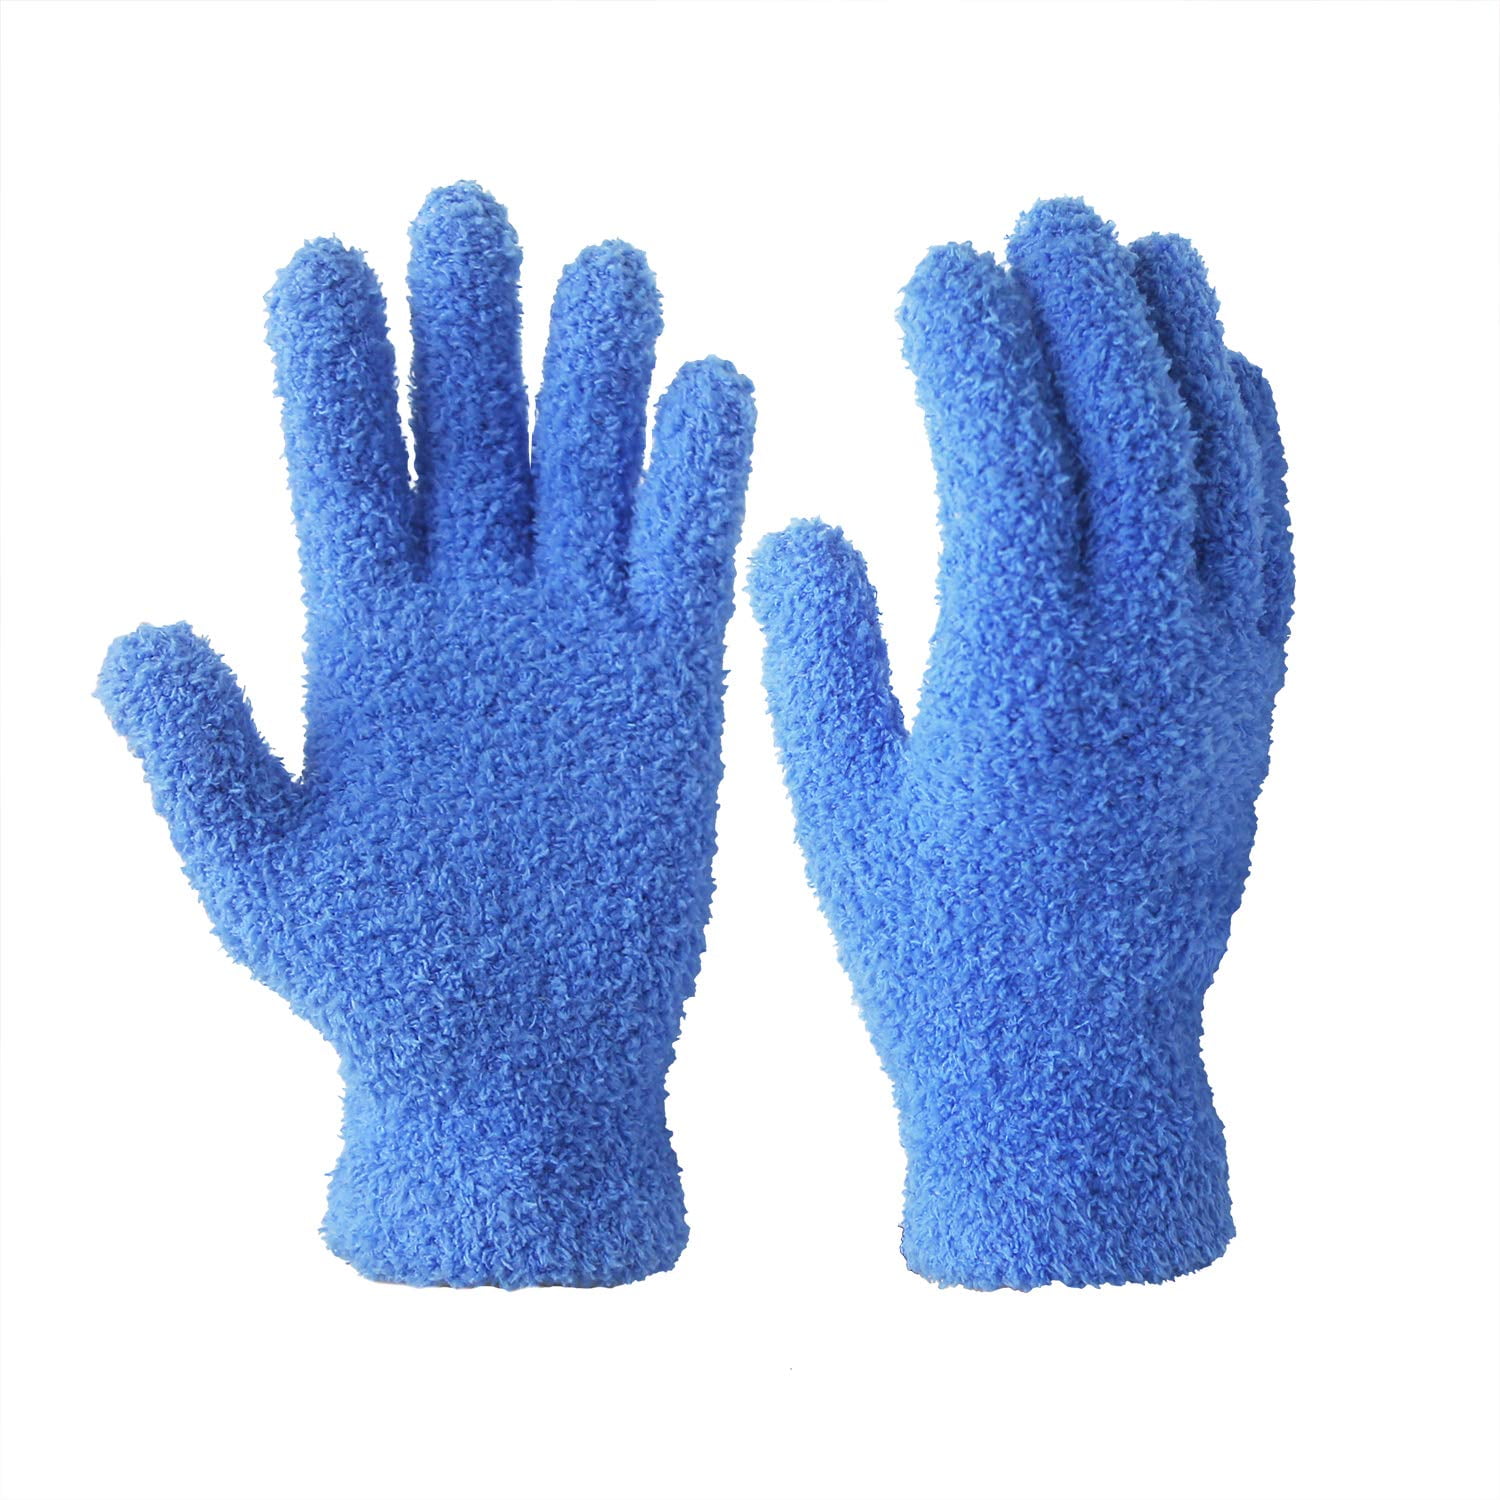 Details about   Microfiber Dusting Cleaning Glove Mitt Cars Windows Dust Remover Tool Reusable 